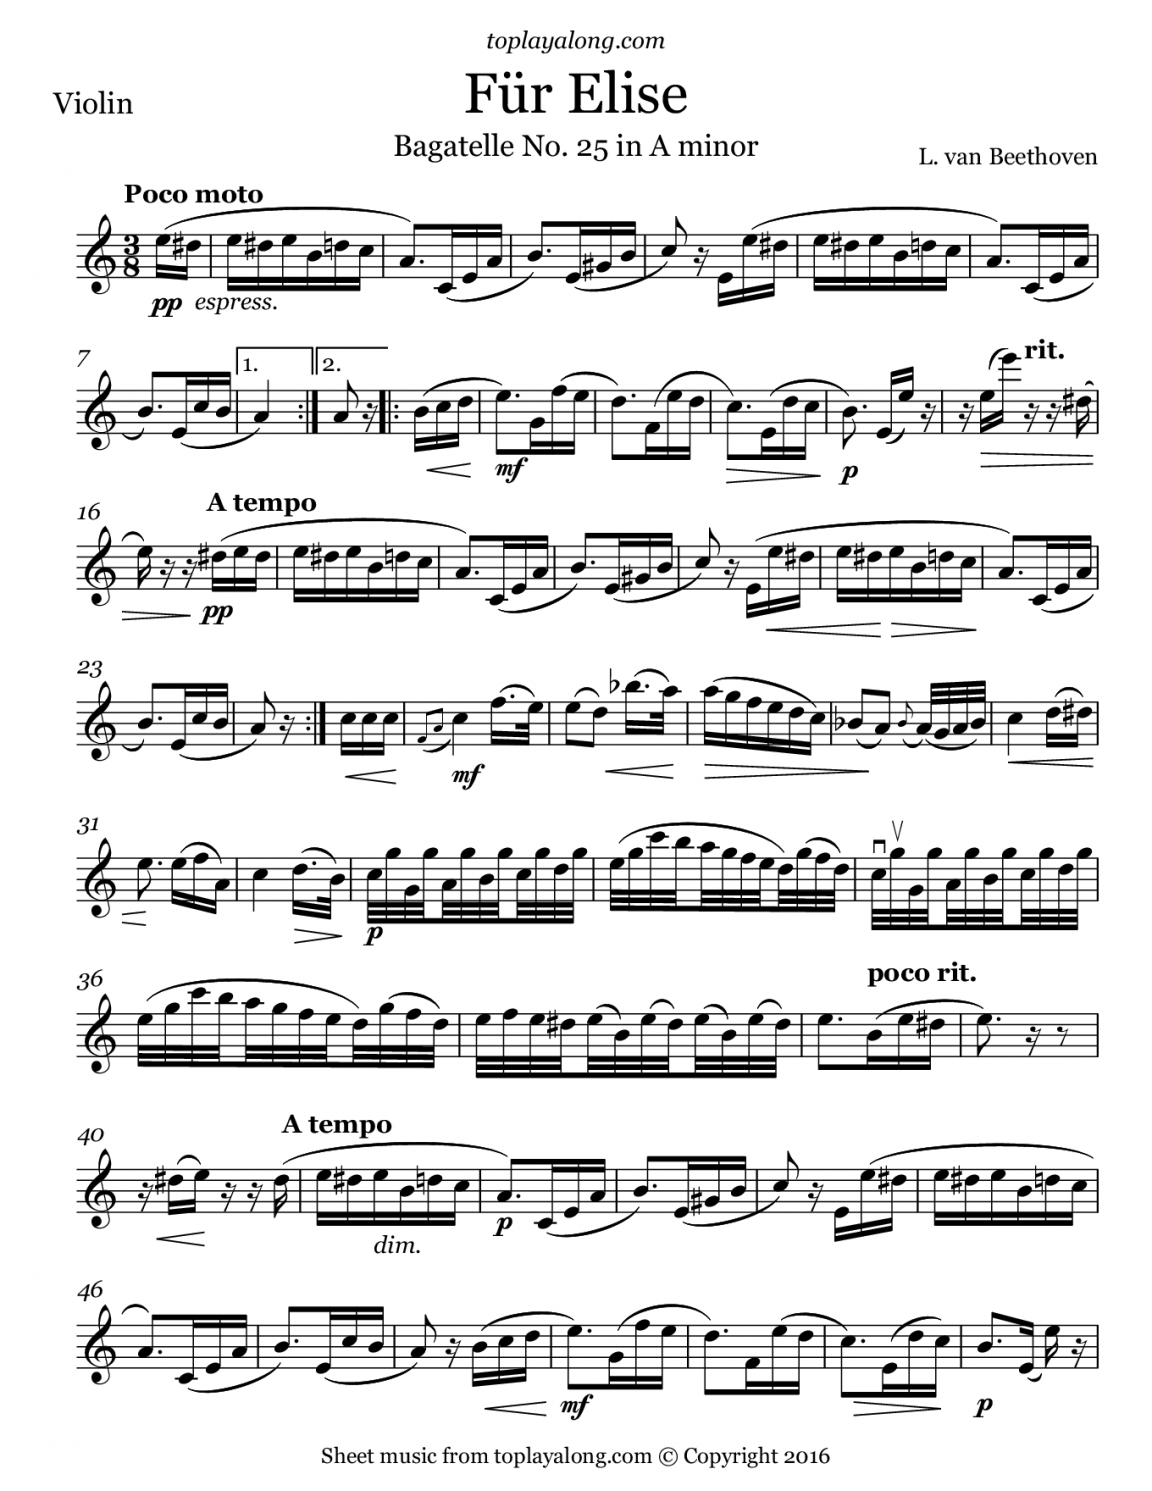 fur-elise-sheet-music-for-piano-pdf-beethoven-minedit